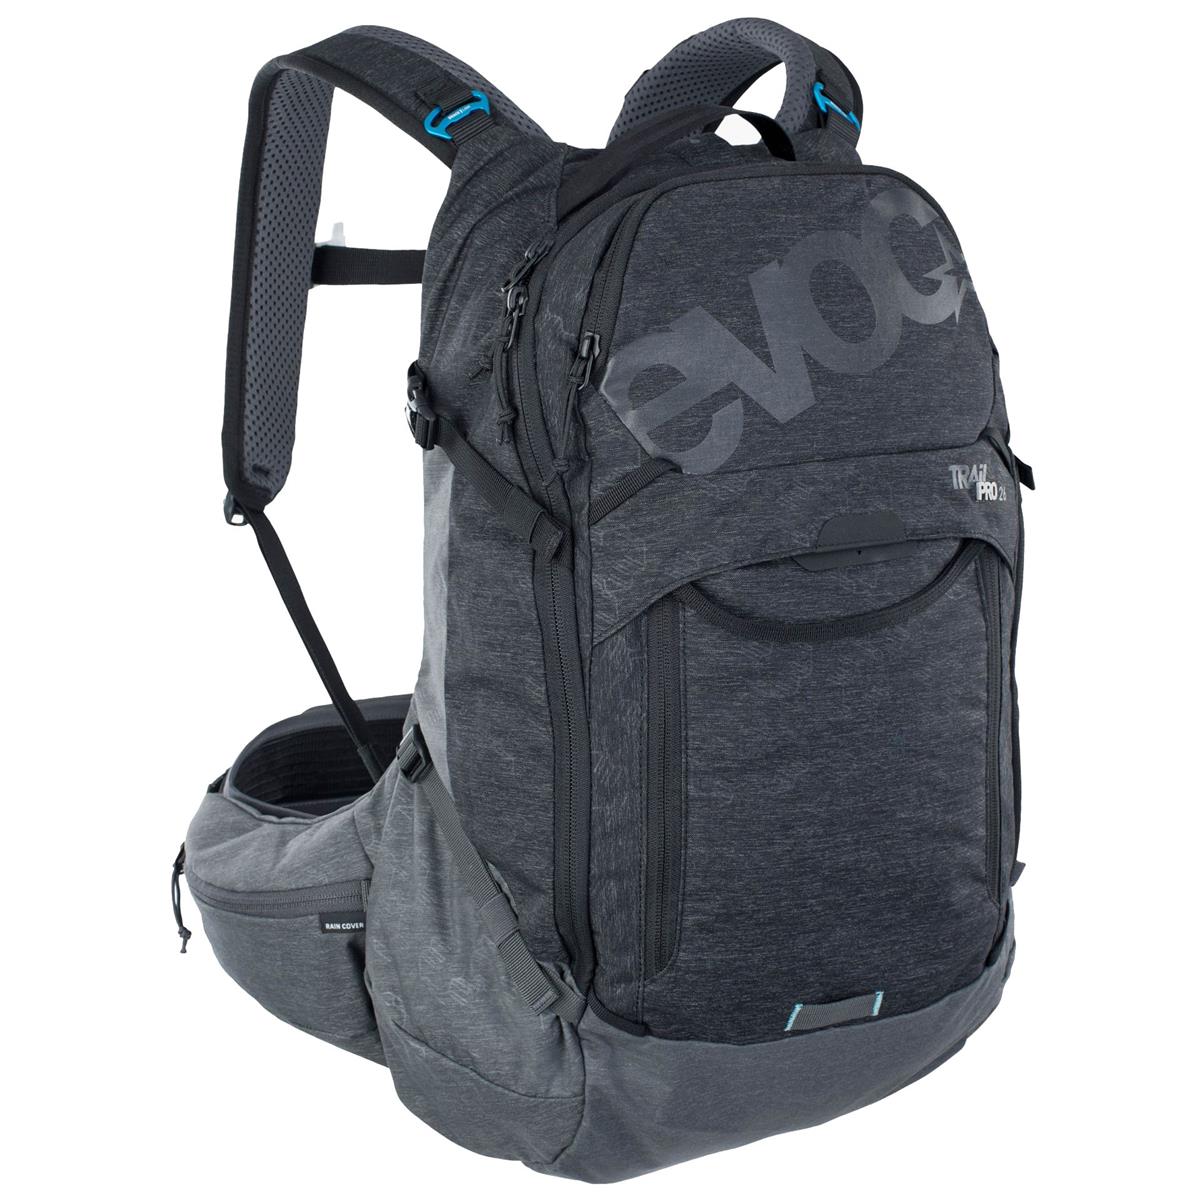 Backpack Trail Pro 26 litri black - carbon grey size S/M